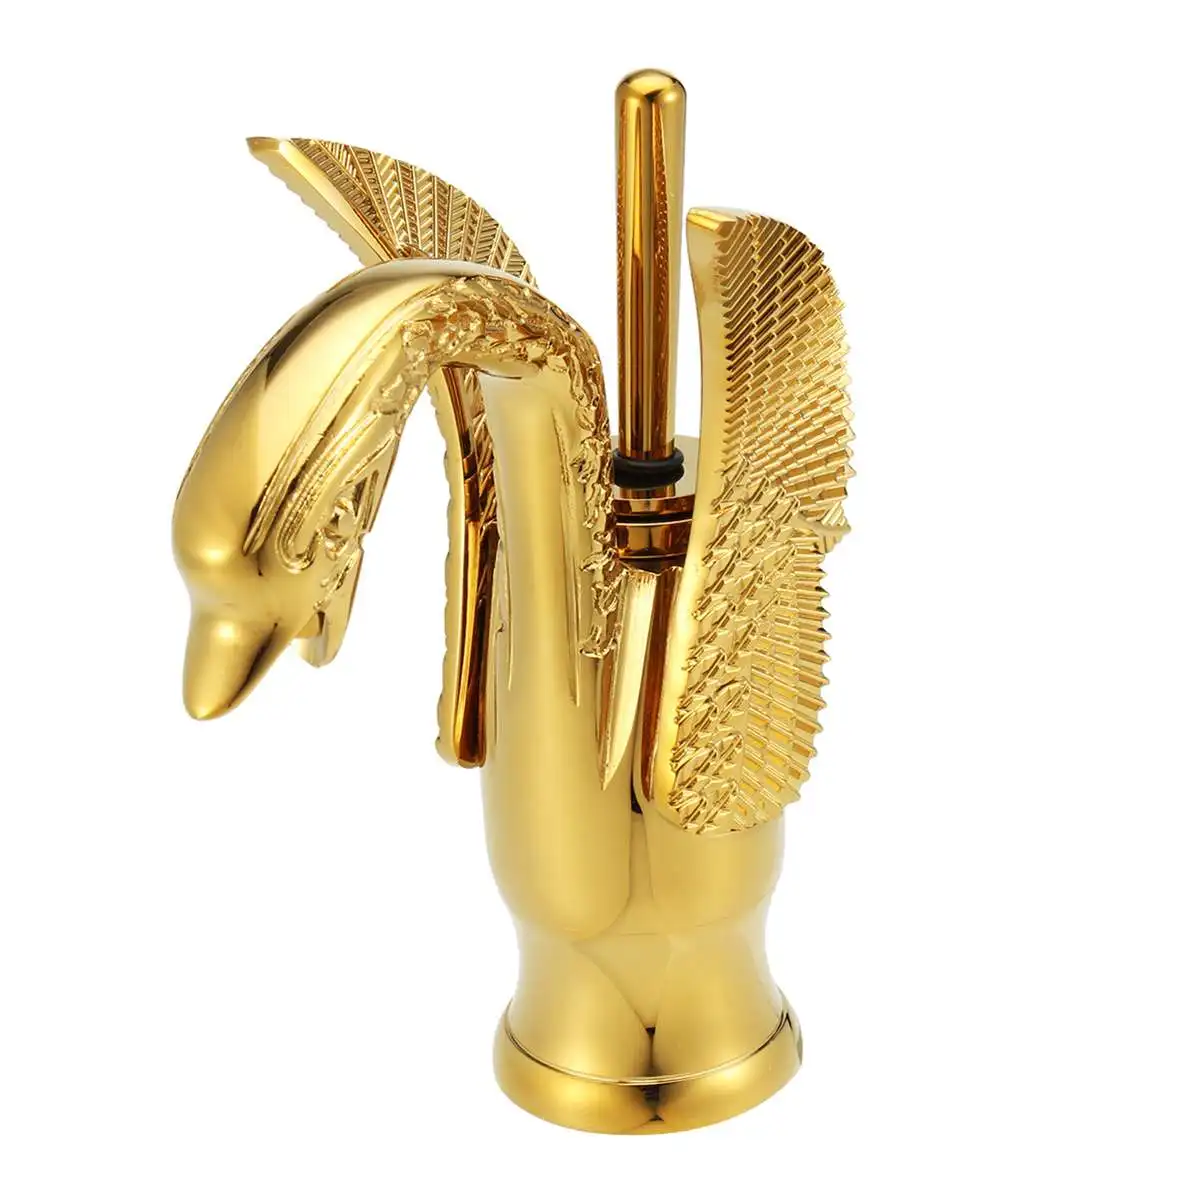 

Gold Brass Swan Basin Faucet Arch Design Brass Hot and Cold Taps Gold Plated Single Hole Tap Luxury Wash Mixer Taps